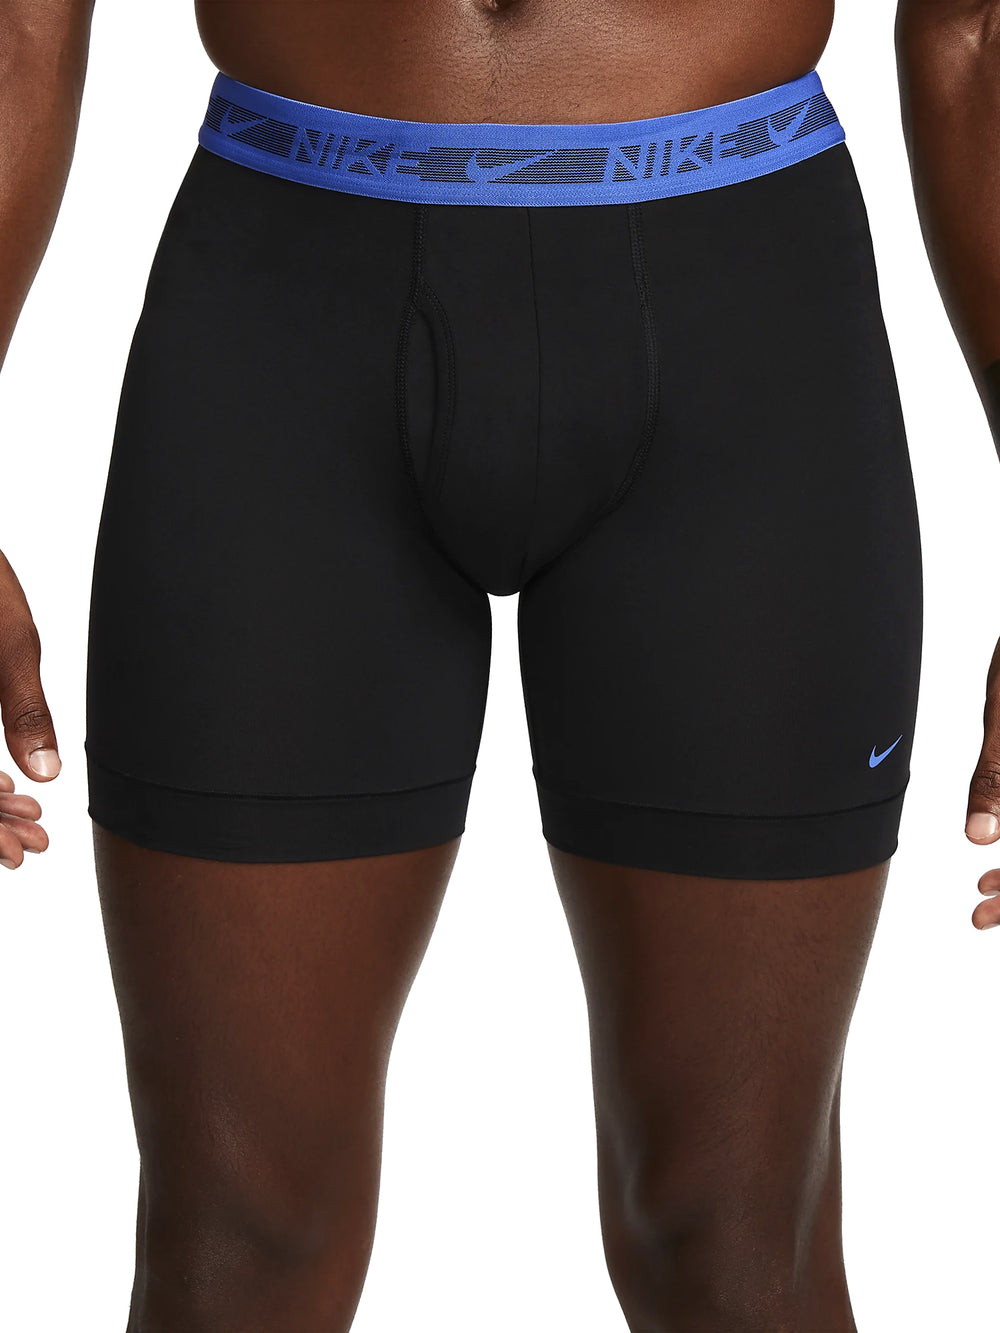 NIKE STACKED BOXER BRIEF 5" 3 PACK